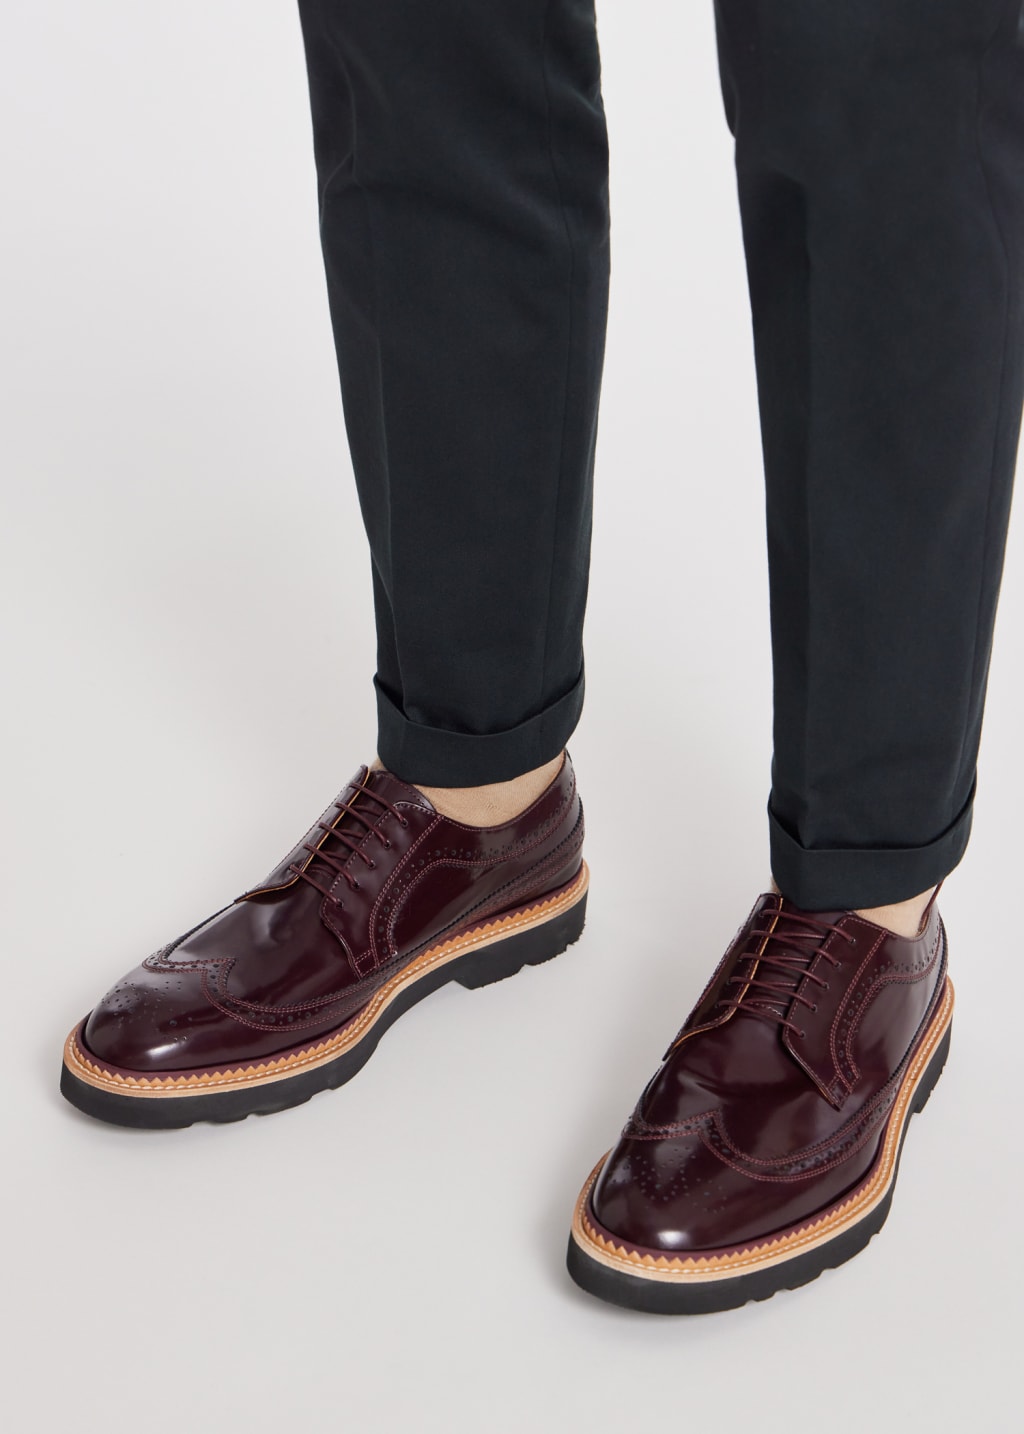 Model View - Bordeaux High-Shine Leather 'Count' Brogues Paul Smith